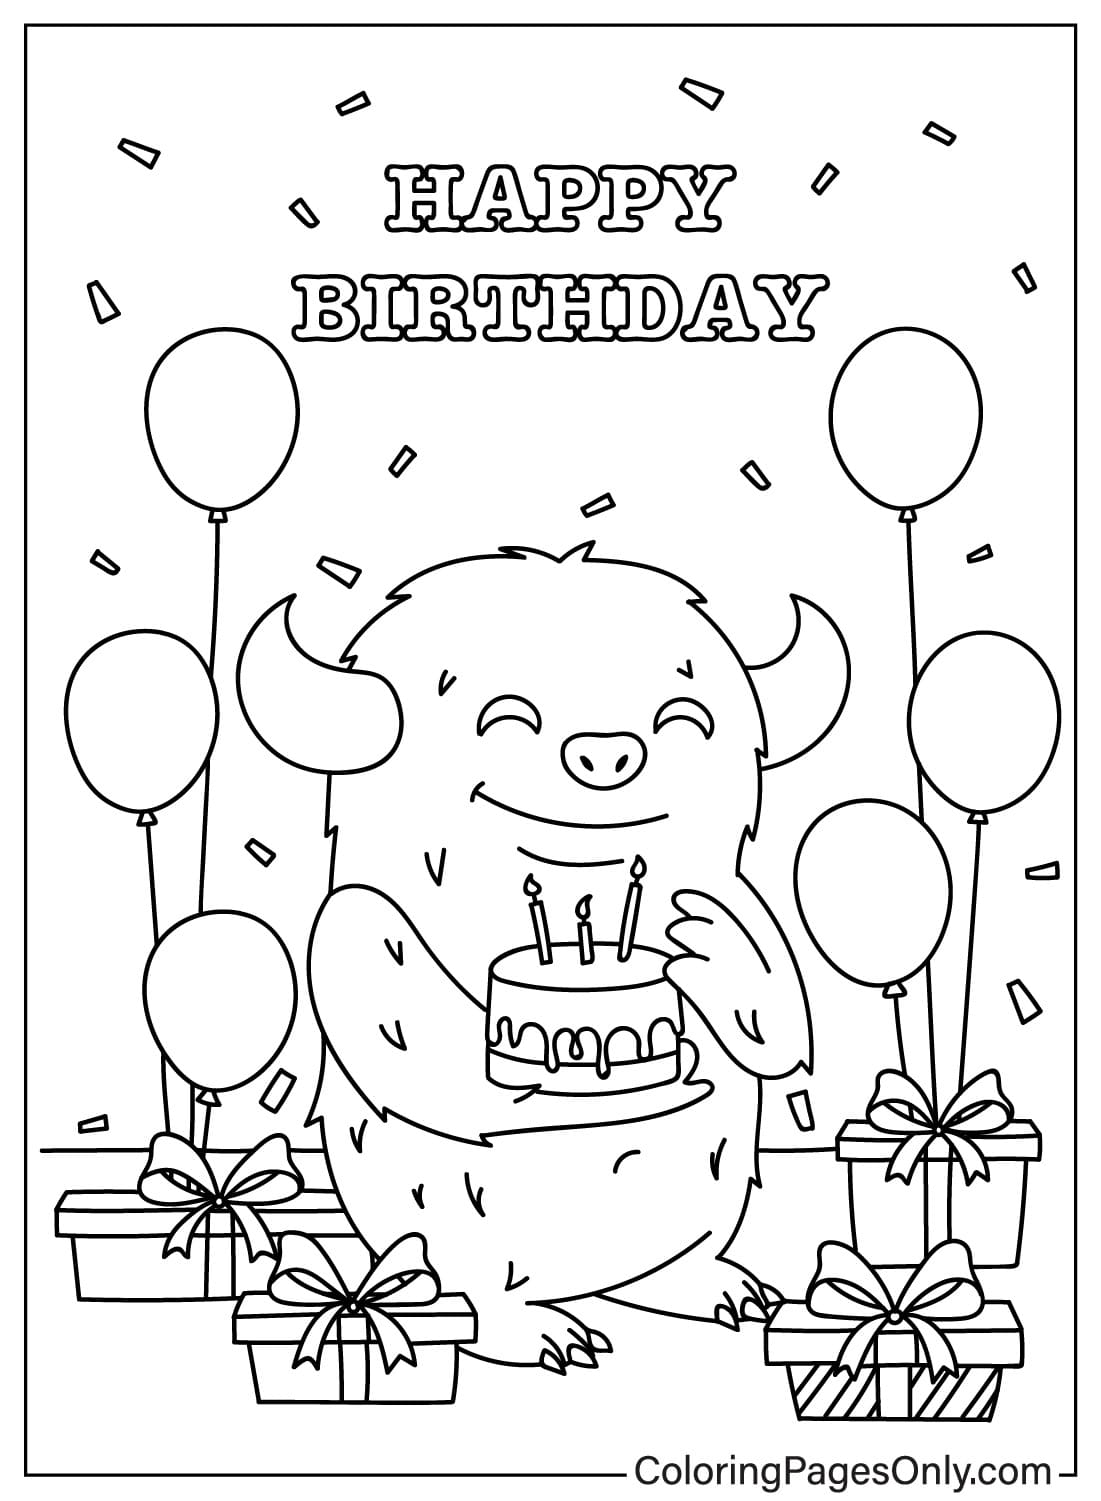 Happy Birthday Card Coloring Sheet for Kids - Free Printable Coloring Pages